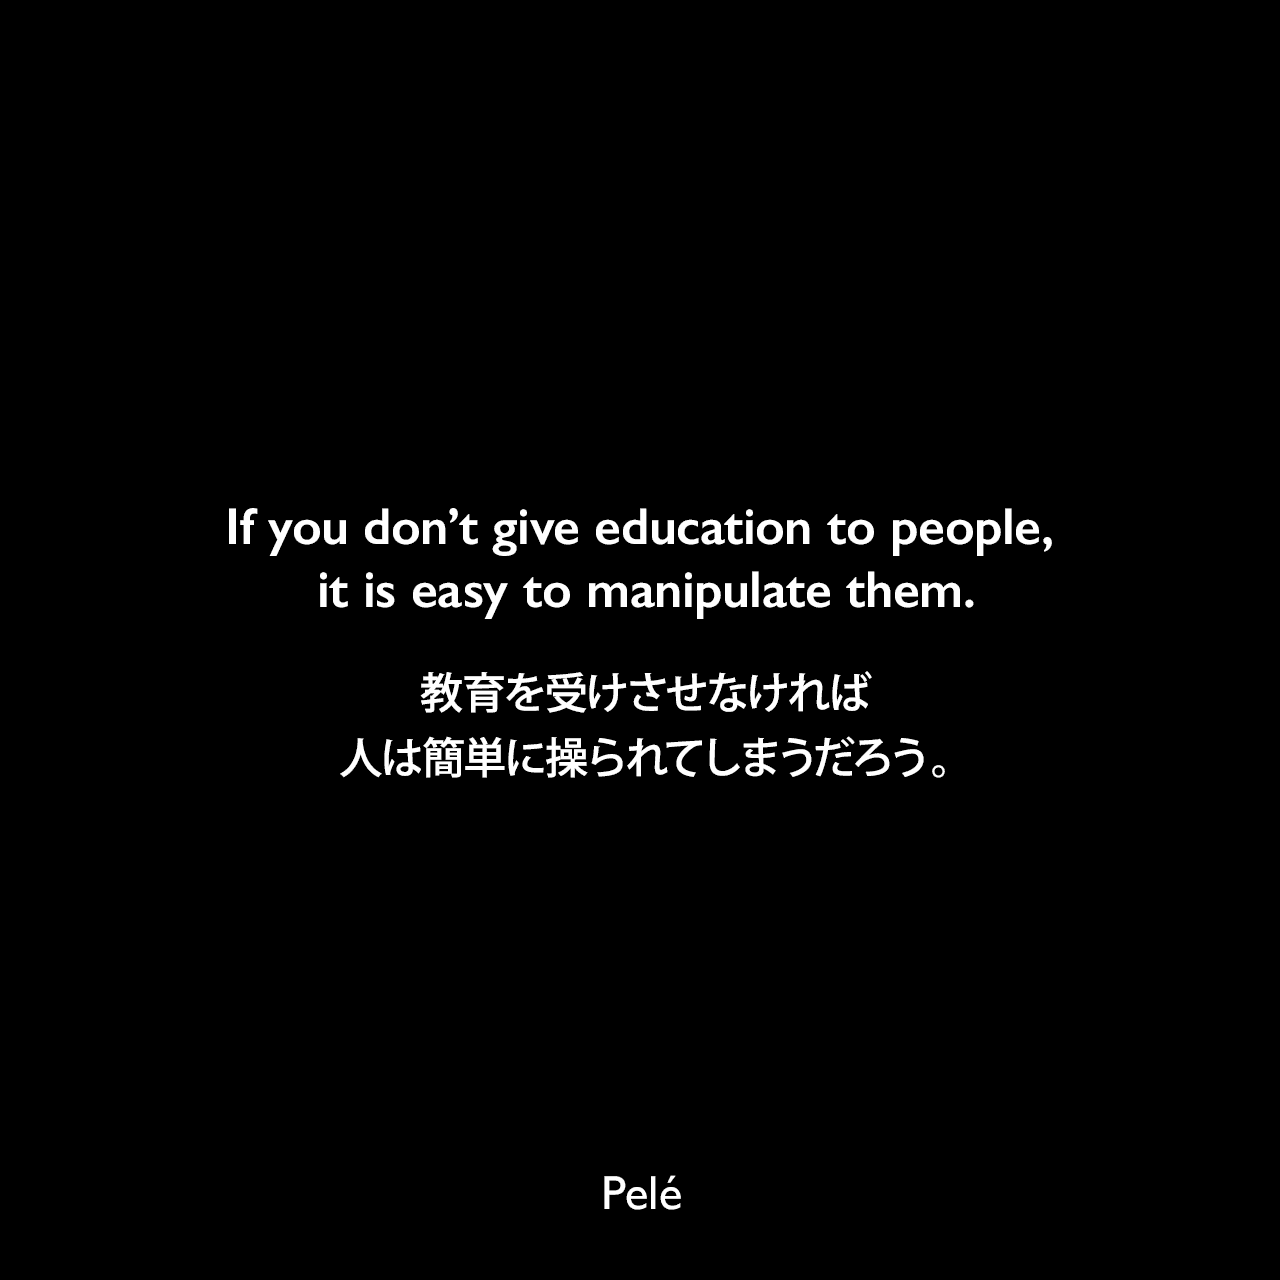 If you don’t give education to people, it is easy to manipulate them.教育を受けさせなければ、人は簡単に操られてしまうだろう。Pelé